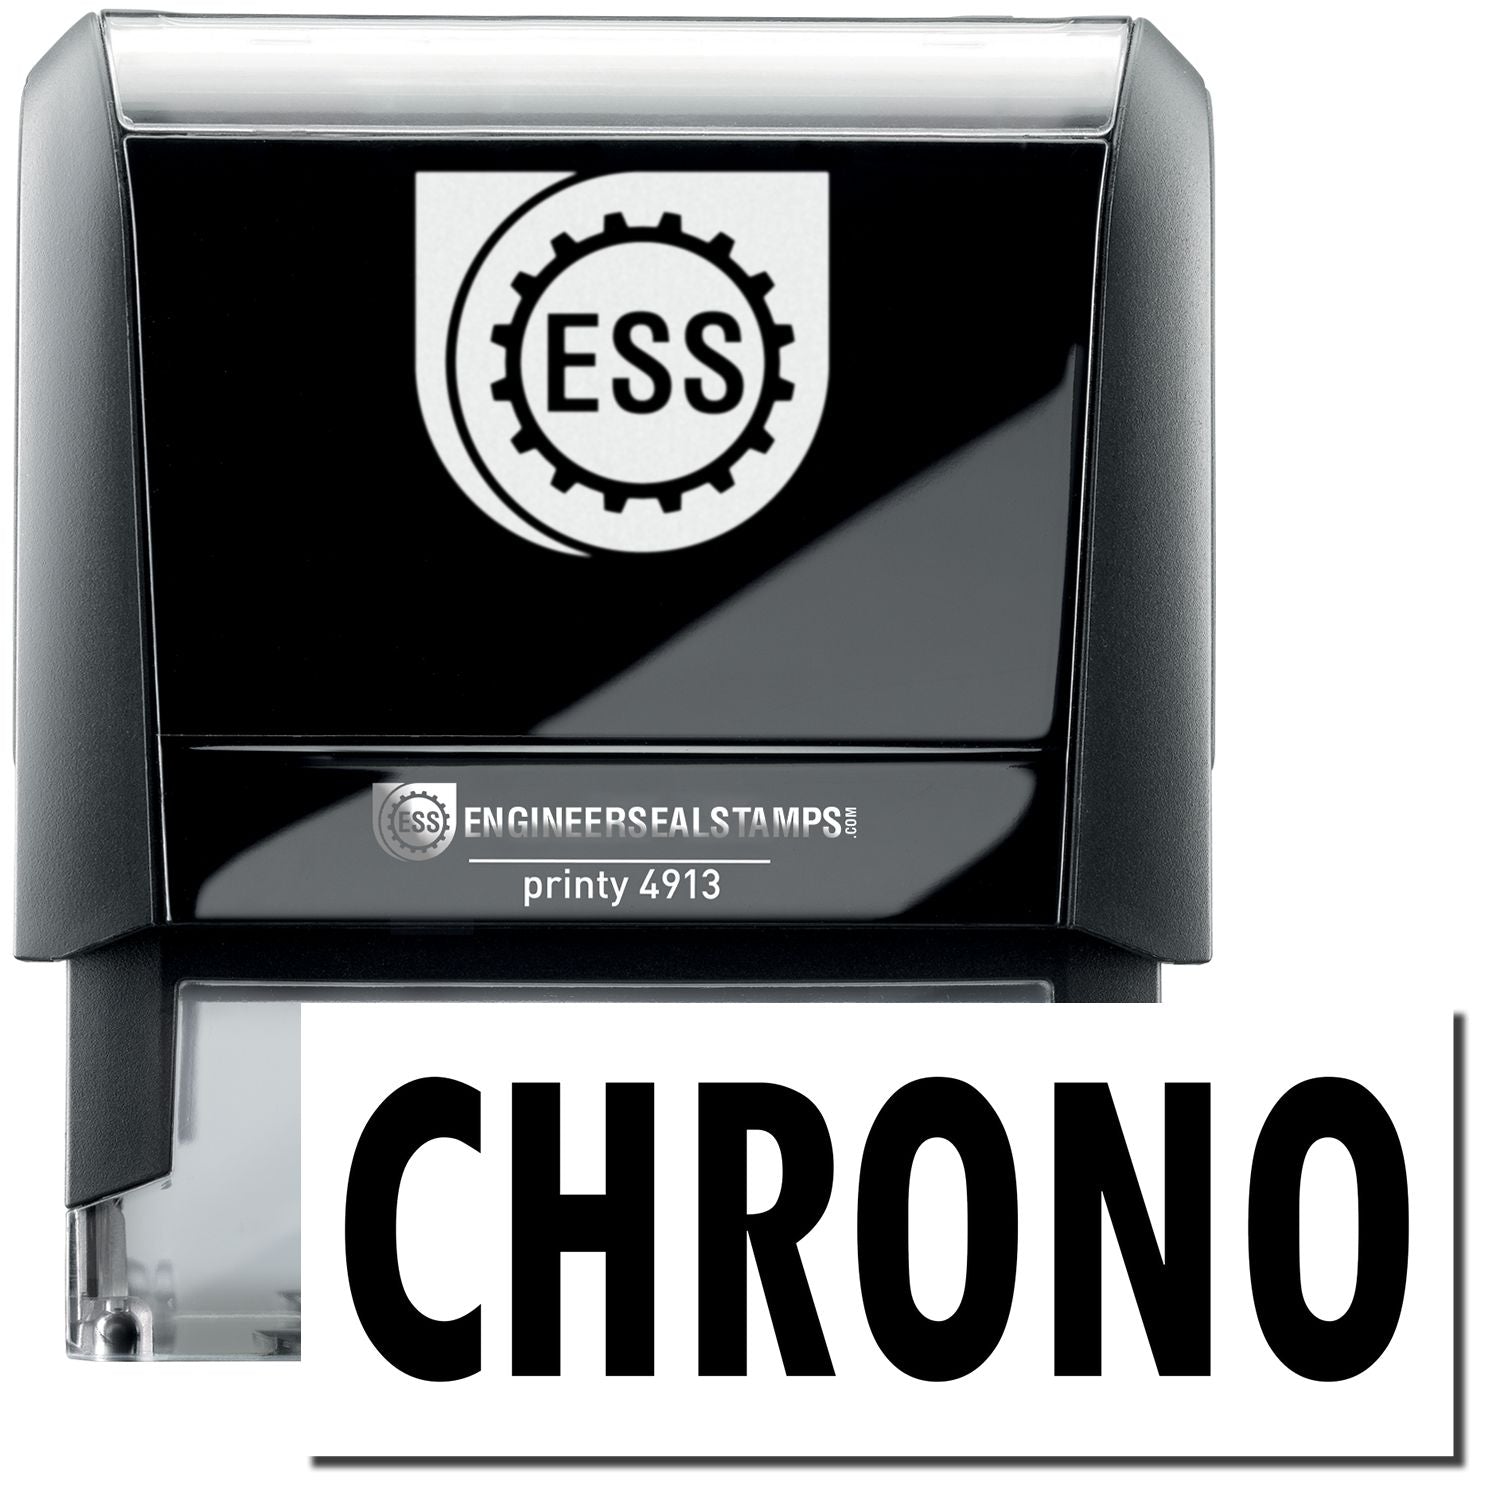 A large self-inking stamp with a stamped image showing how the word "CHRONO" in a large bold font is displayed by it.